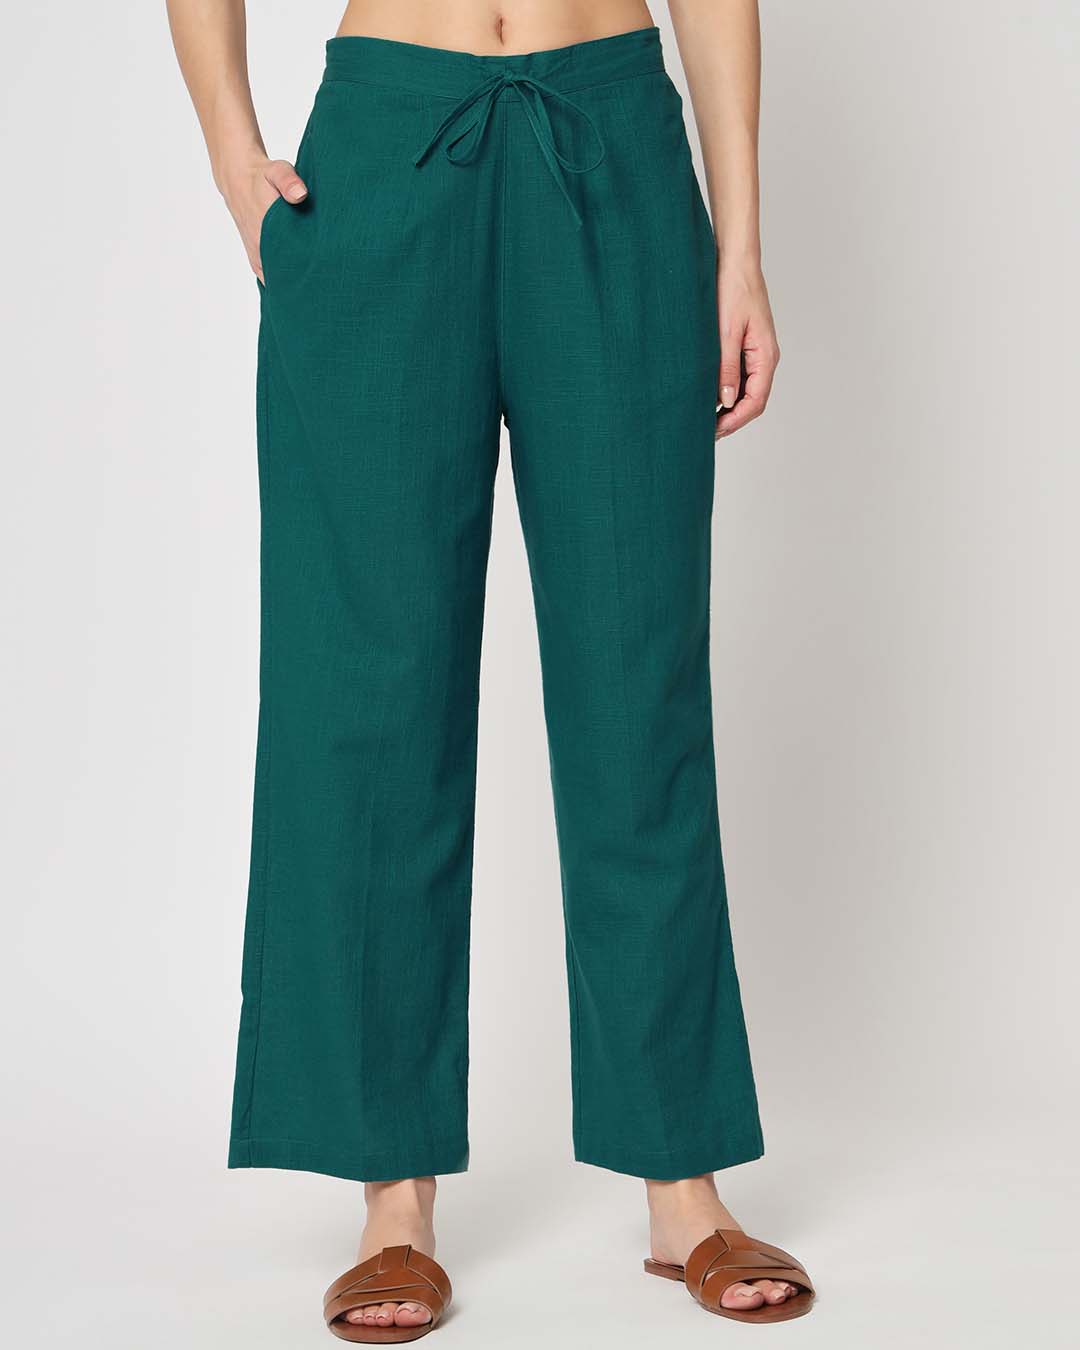 Combo: Deep Teal & Forest Green Straight Pants- Set of 2